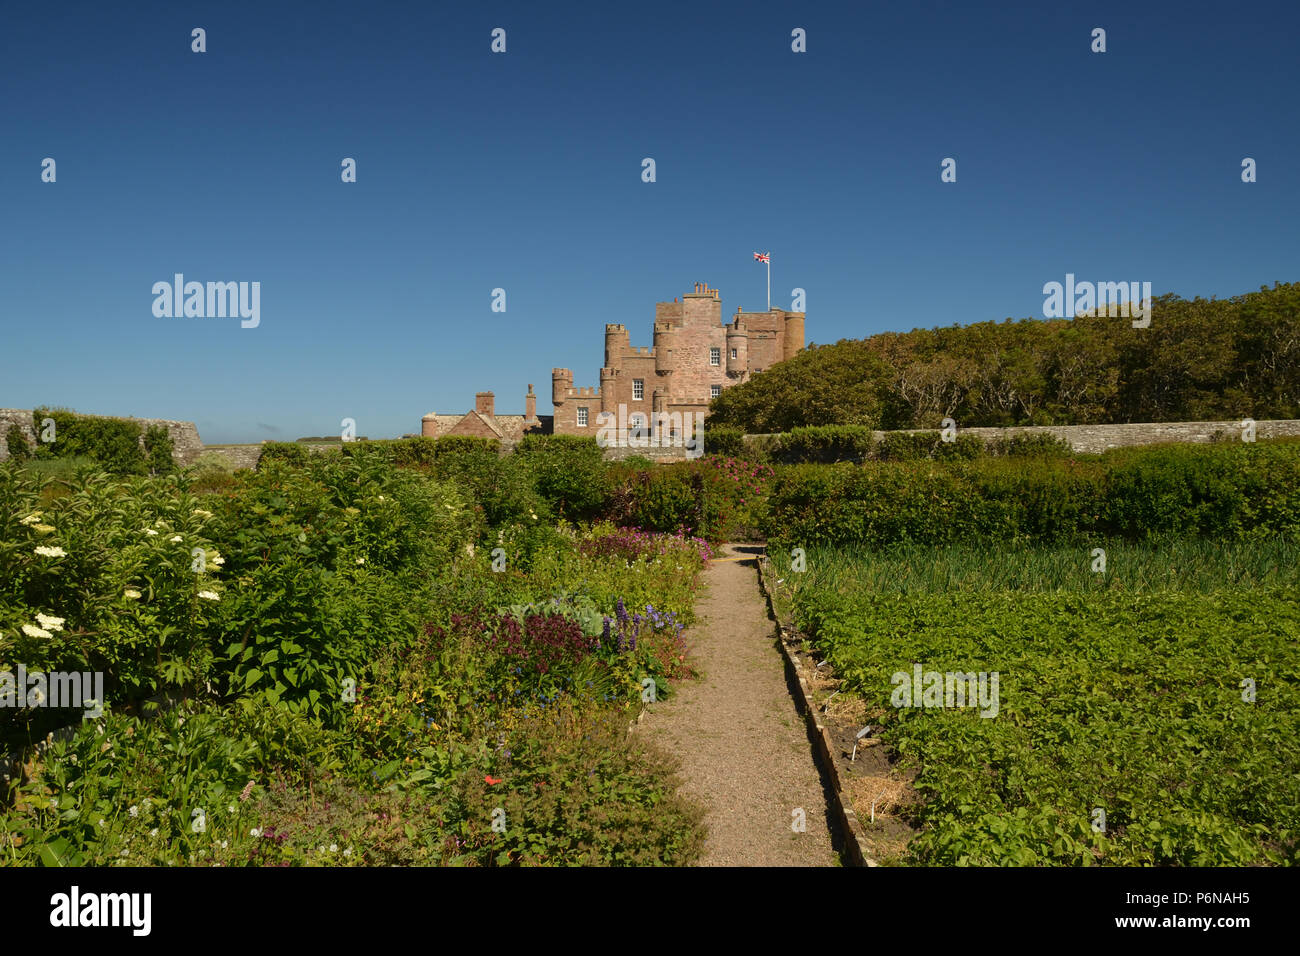 Castle of Mey and Walled Gardens in Summer, Scotland Stock Photo